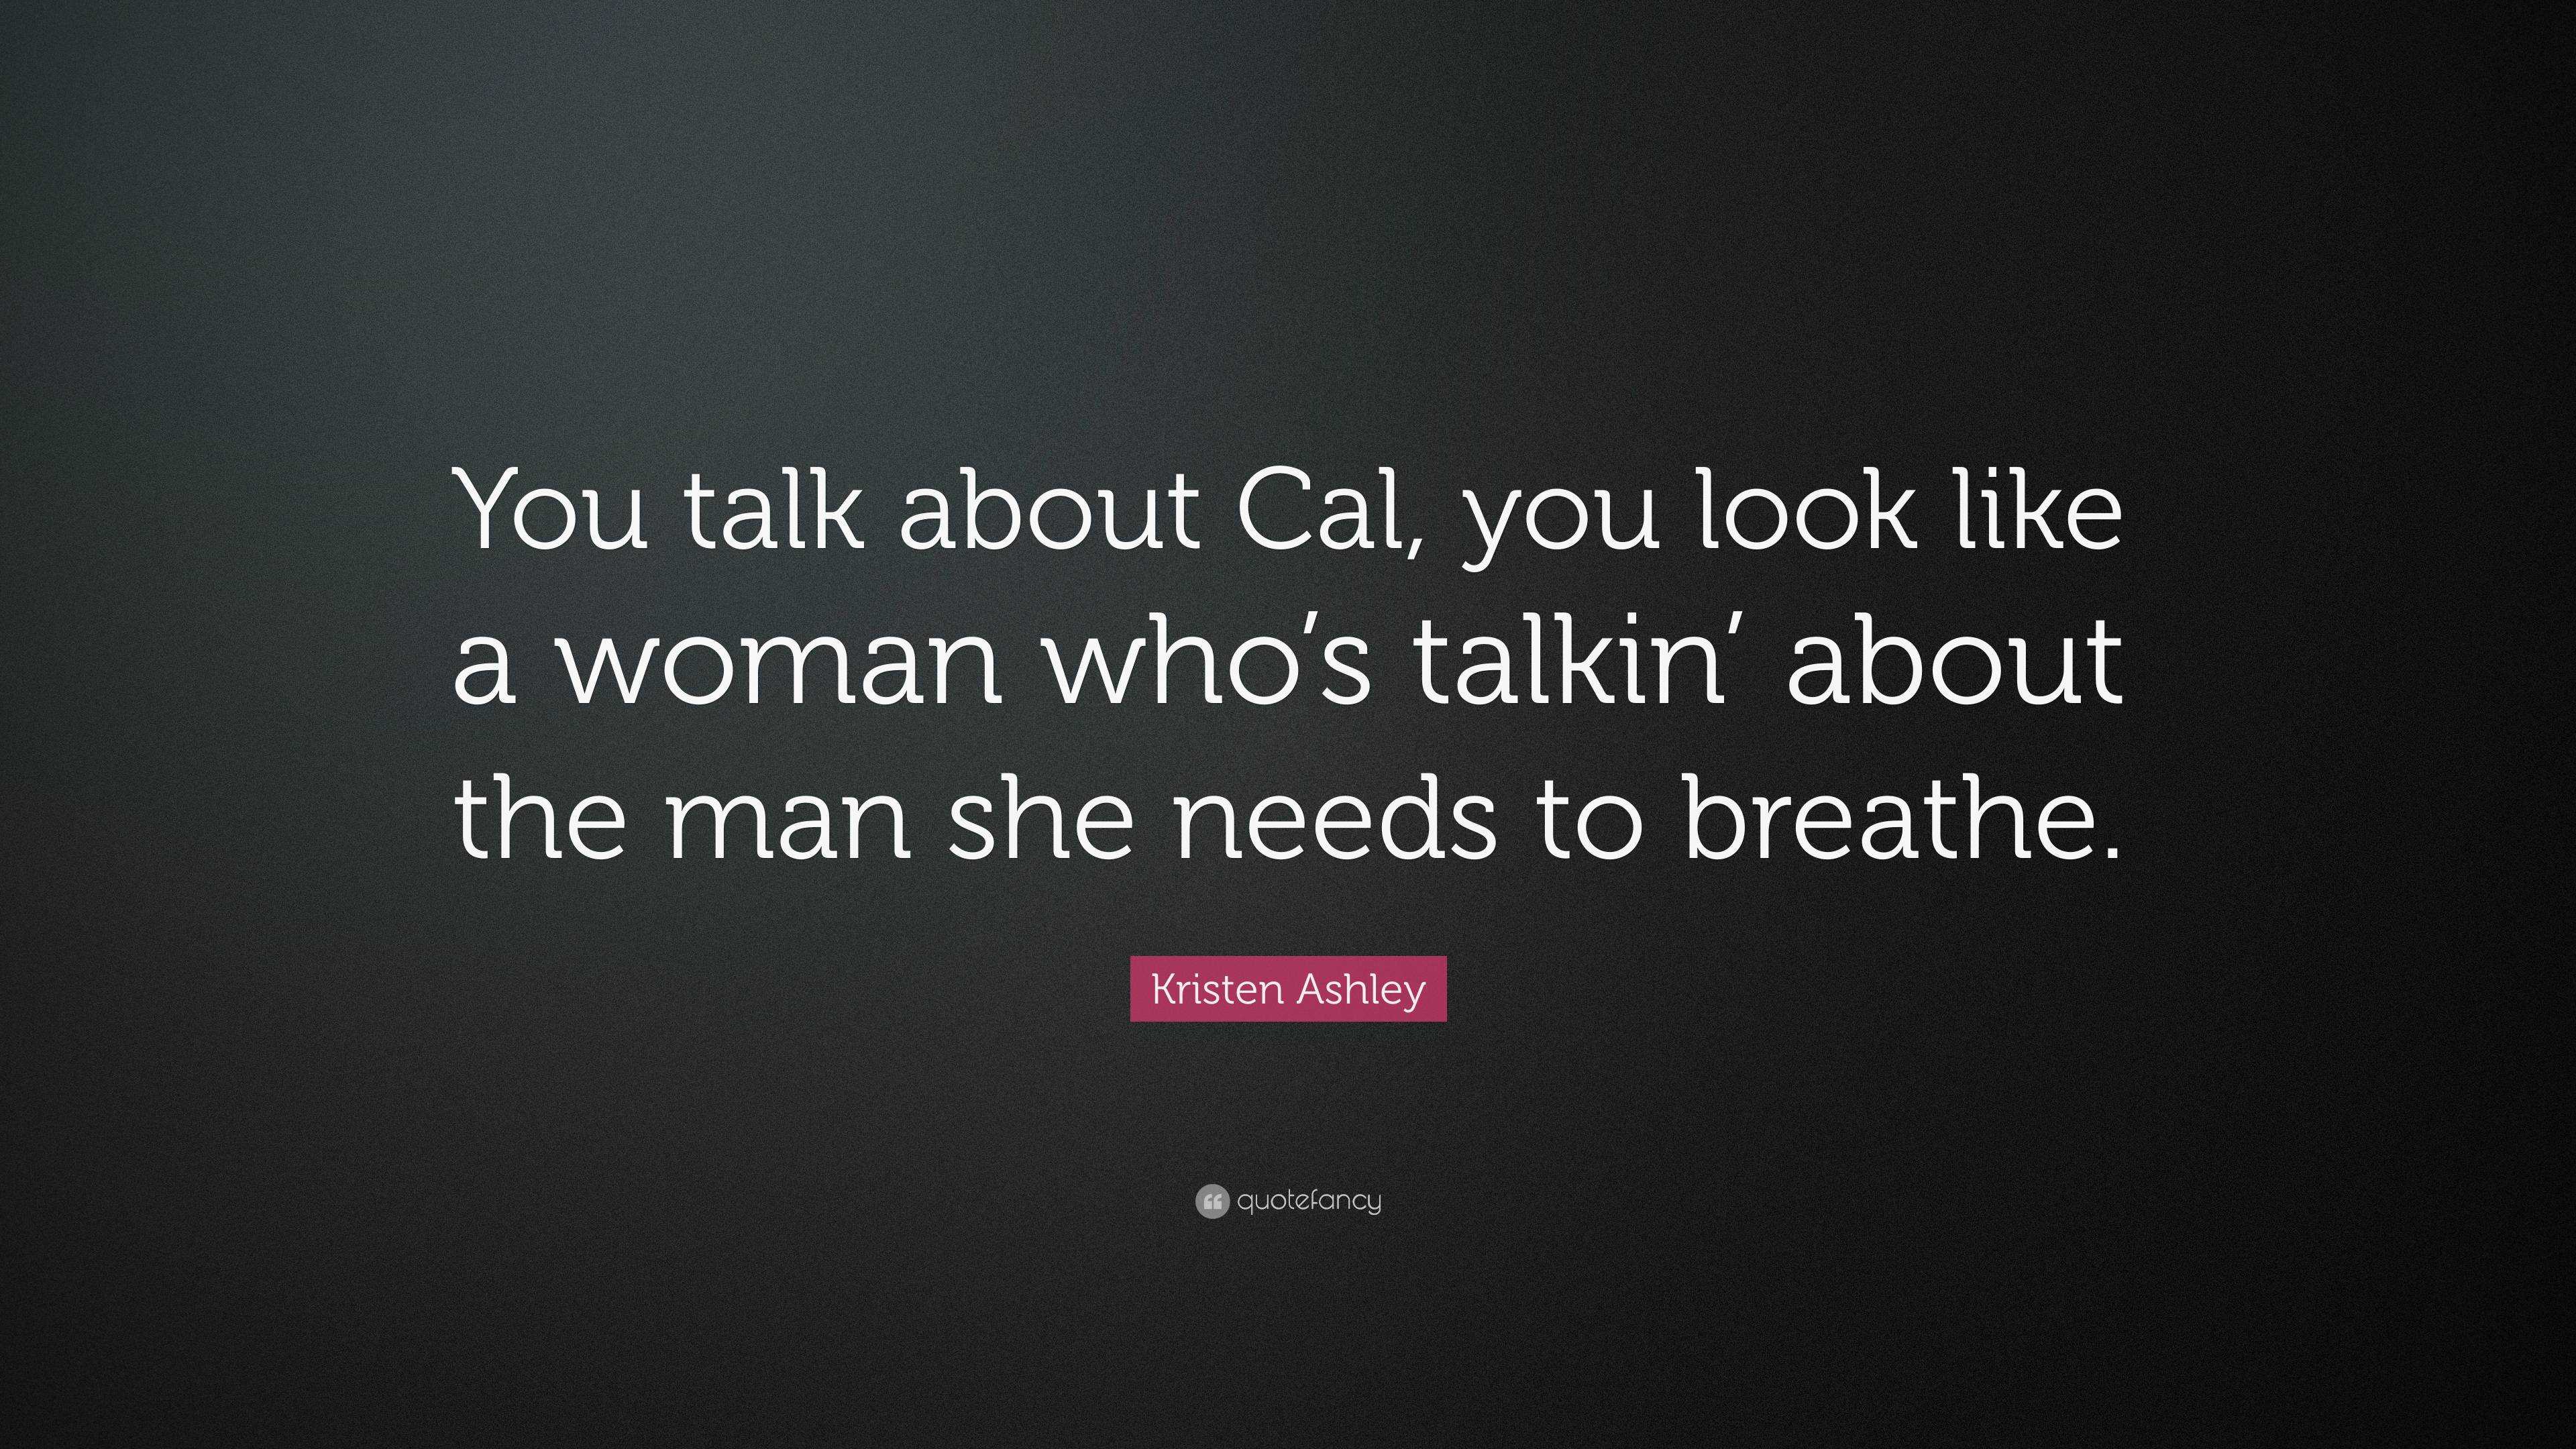 Kristen Ashley Quote: “You talk about Cal, you look like a woman who’s ...